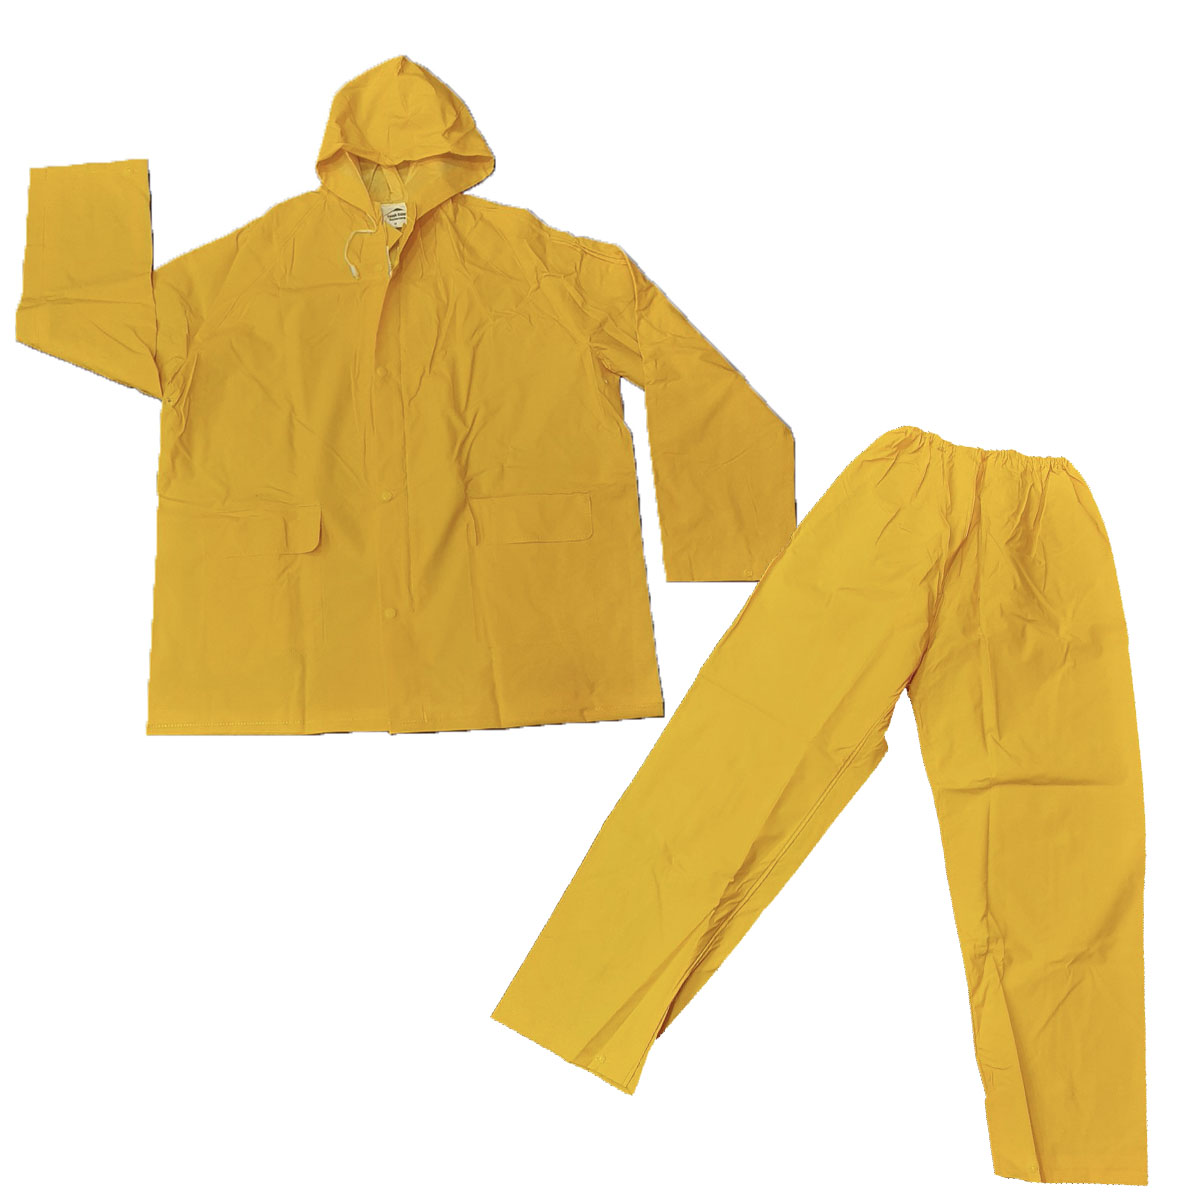 HIGHLANDER RAINCOAT PANTS AND JACKET WITH PLY